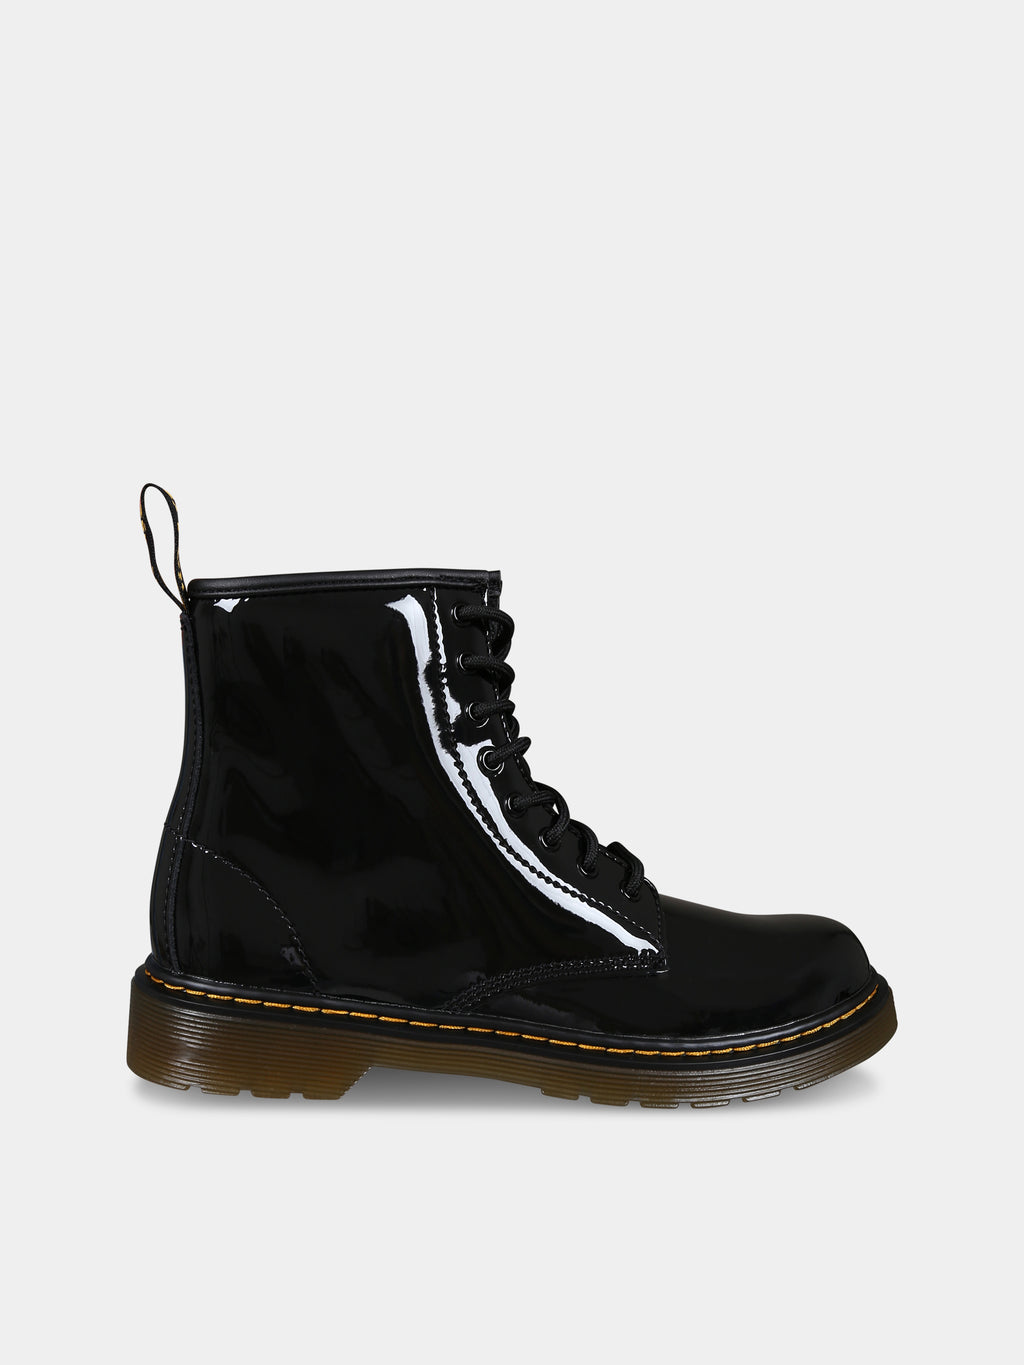 Black 1460 boots for girl with logo